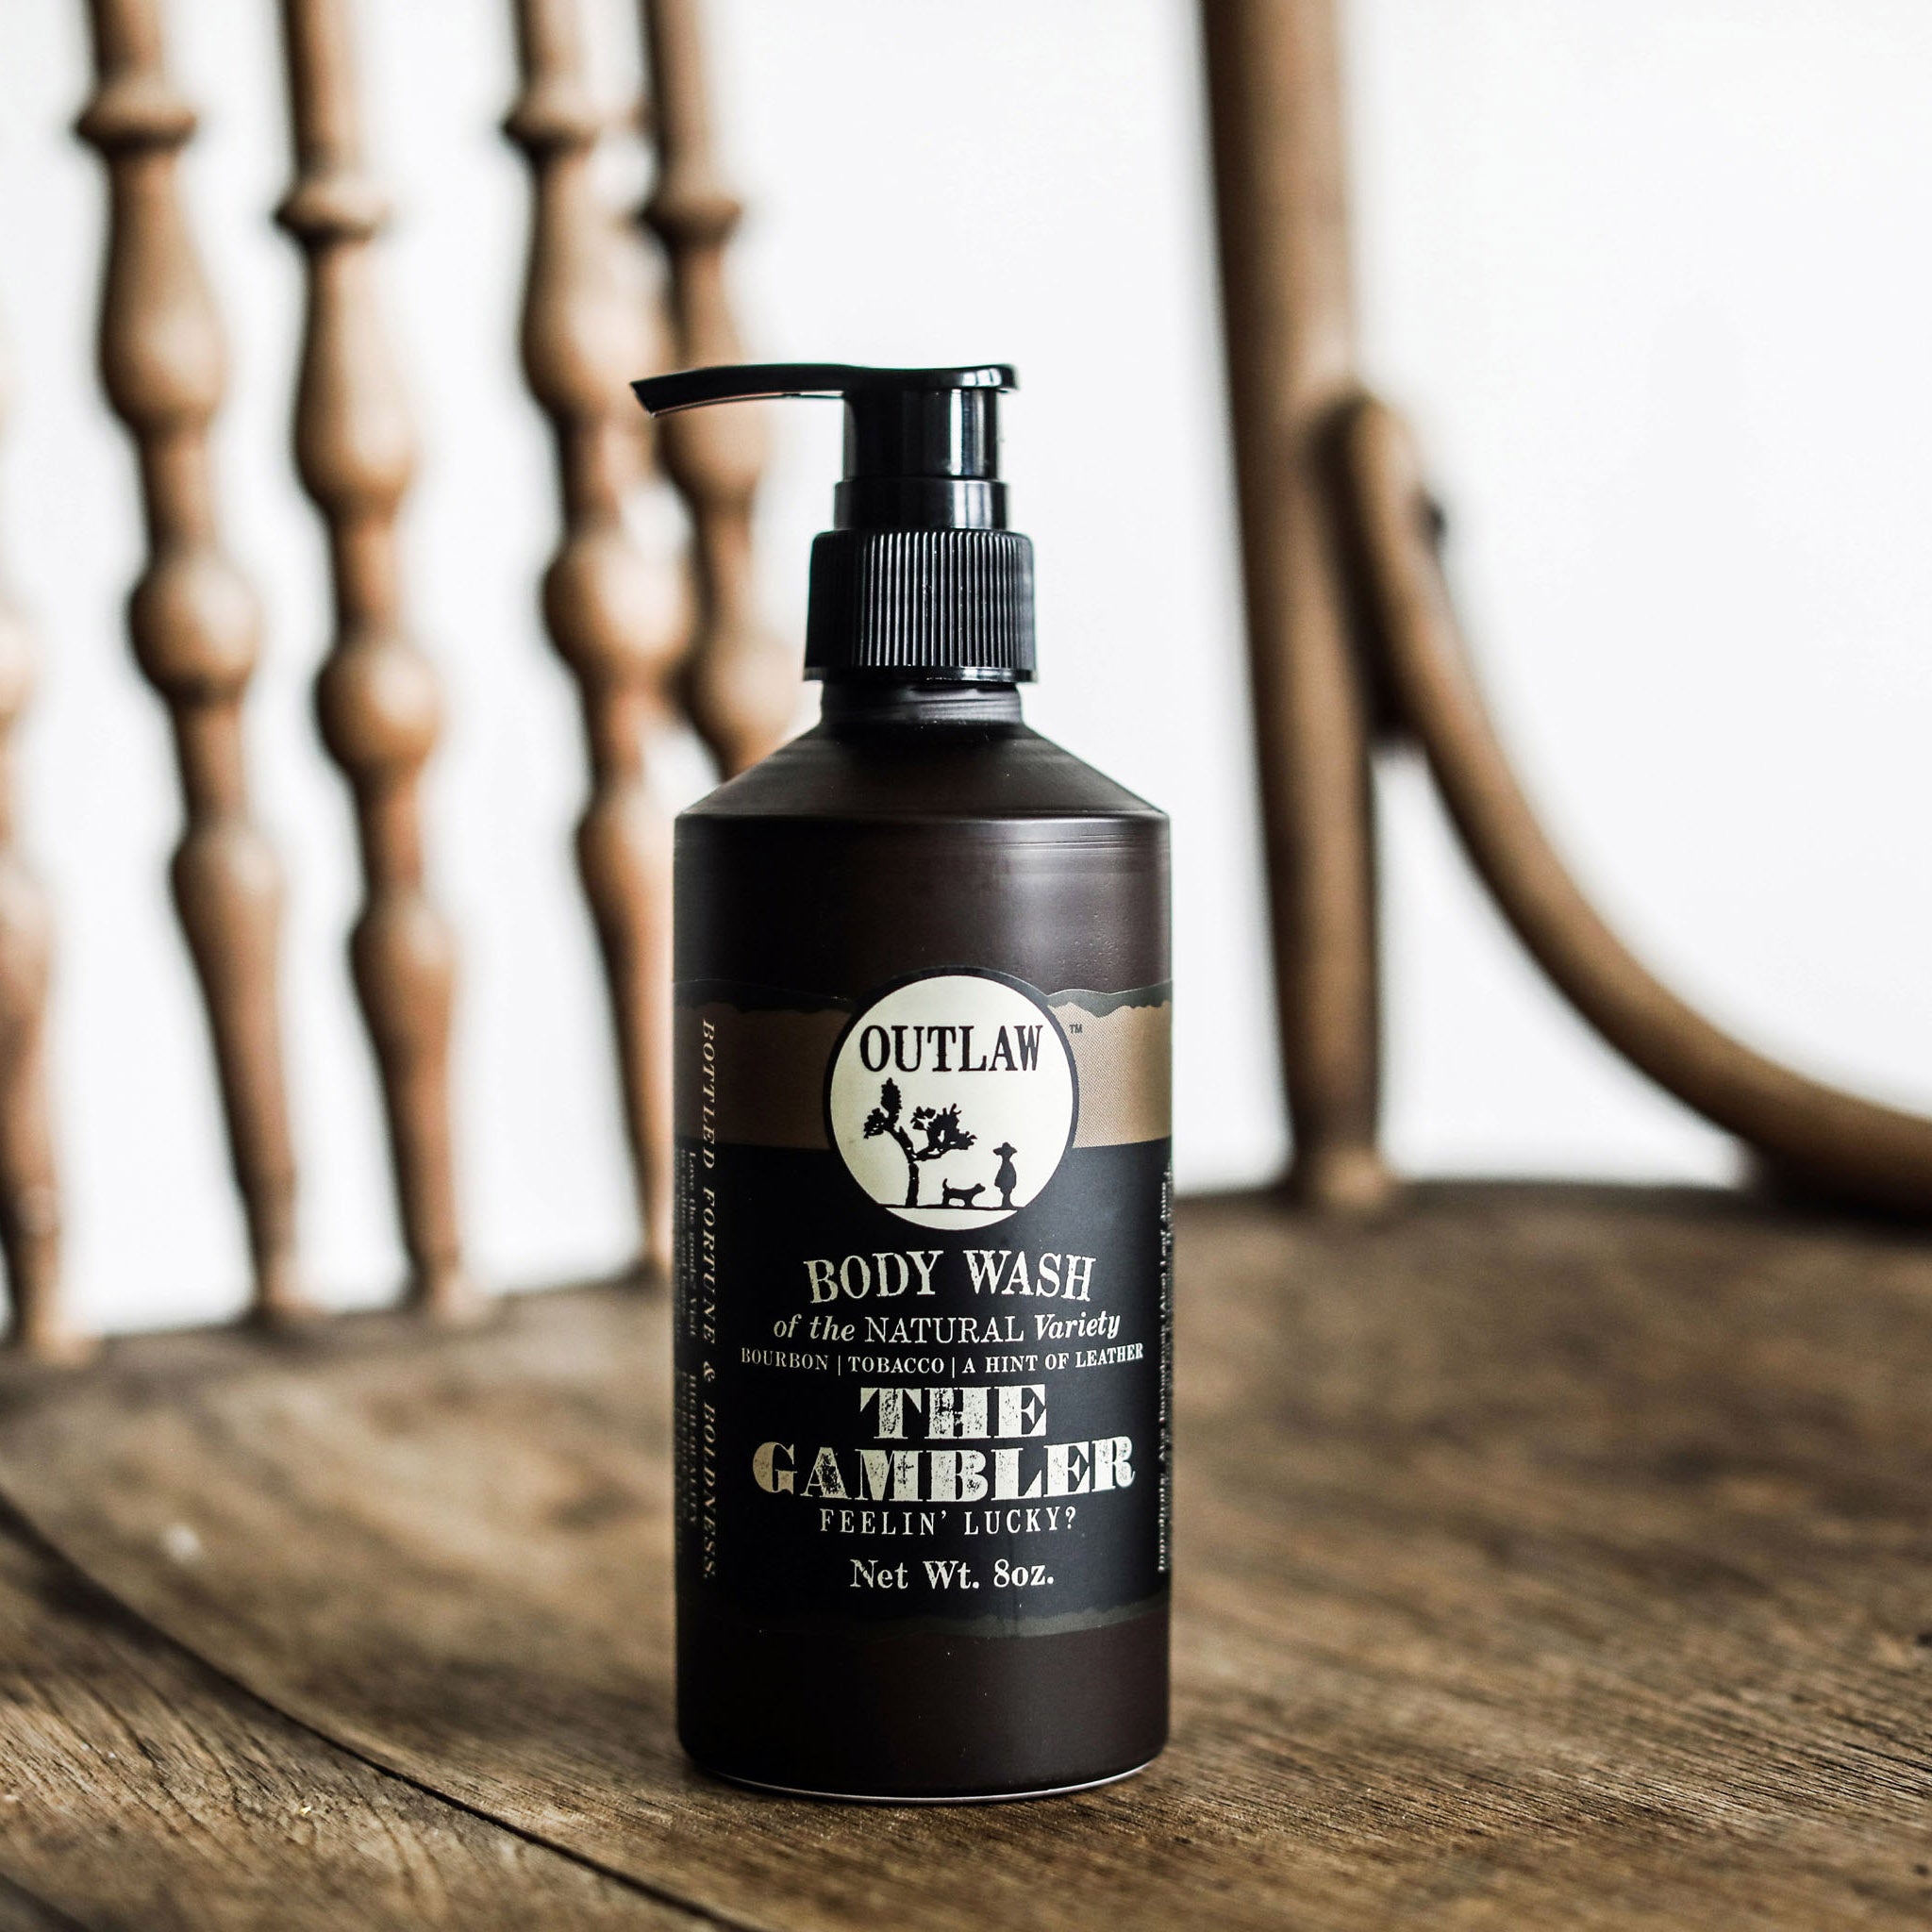 Outlaw's Bold & Rugged Natural Body Wash